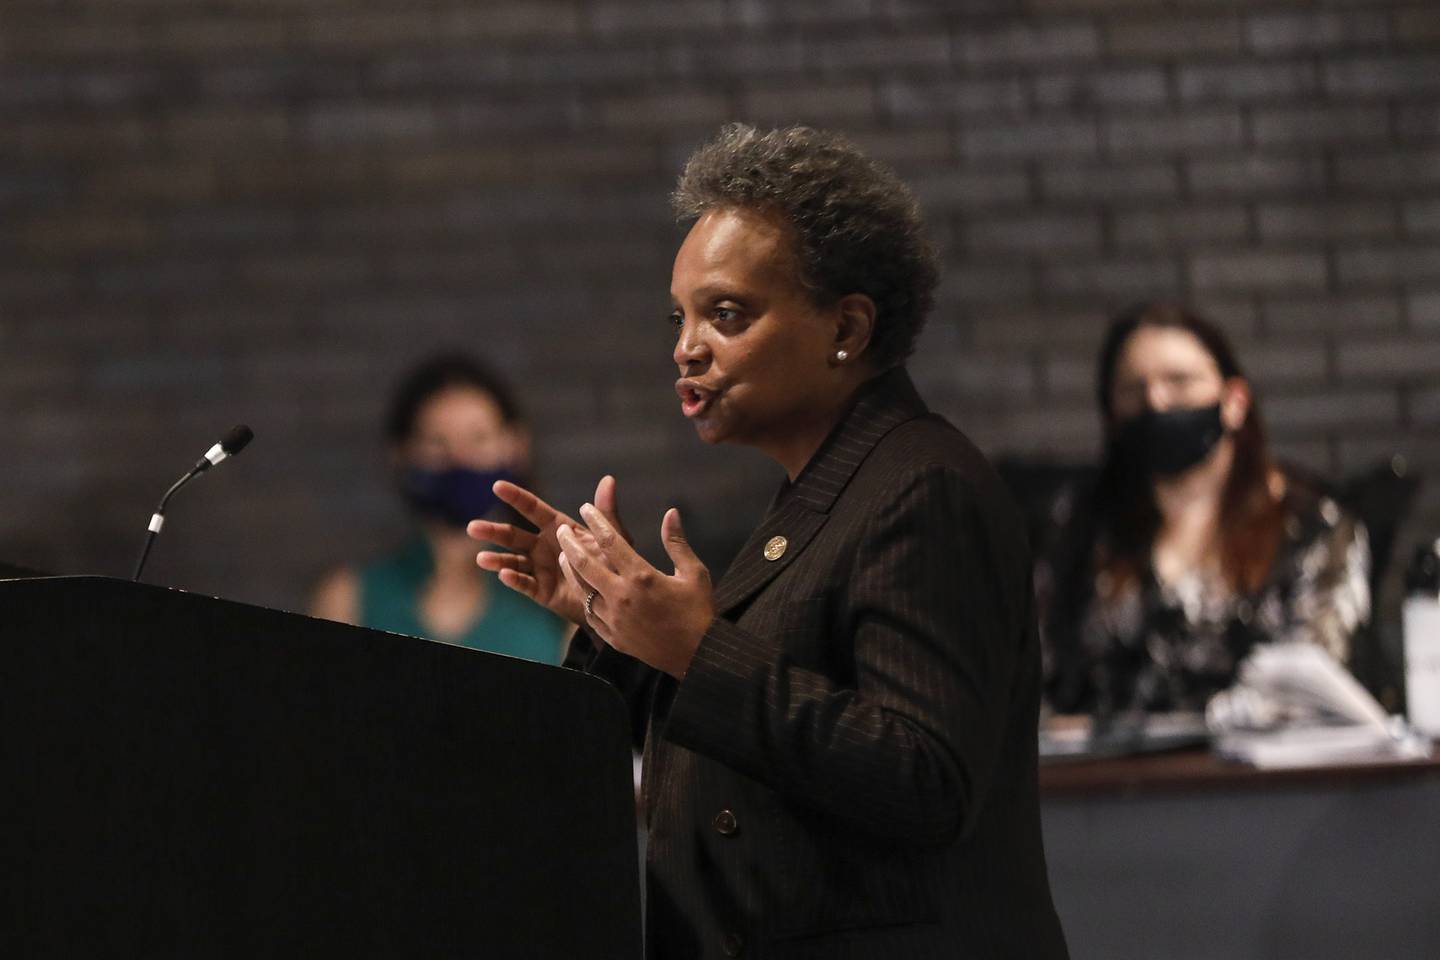 Chicago Mayor Lori Lightfoot fields questions about the City of Chicago's water treatment program on Thursday, Dec. 17, 2020, at Joliet City Hall in Joliet, Ill. Chicago Mayor Lori Lightfoot and Hammond Mayor Thomas McDermott Jr. made presentations at a special meeting of the Joliet City Council ahead of their decision on where to purchase water for the City of Joliet.